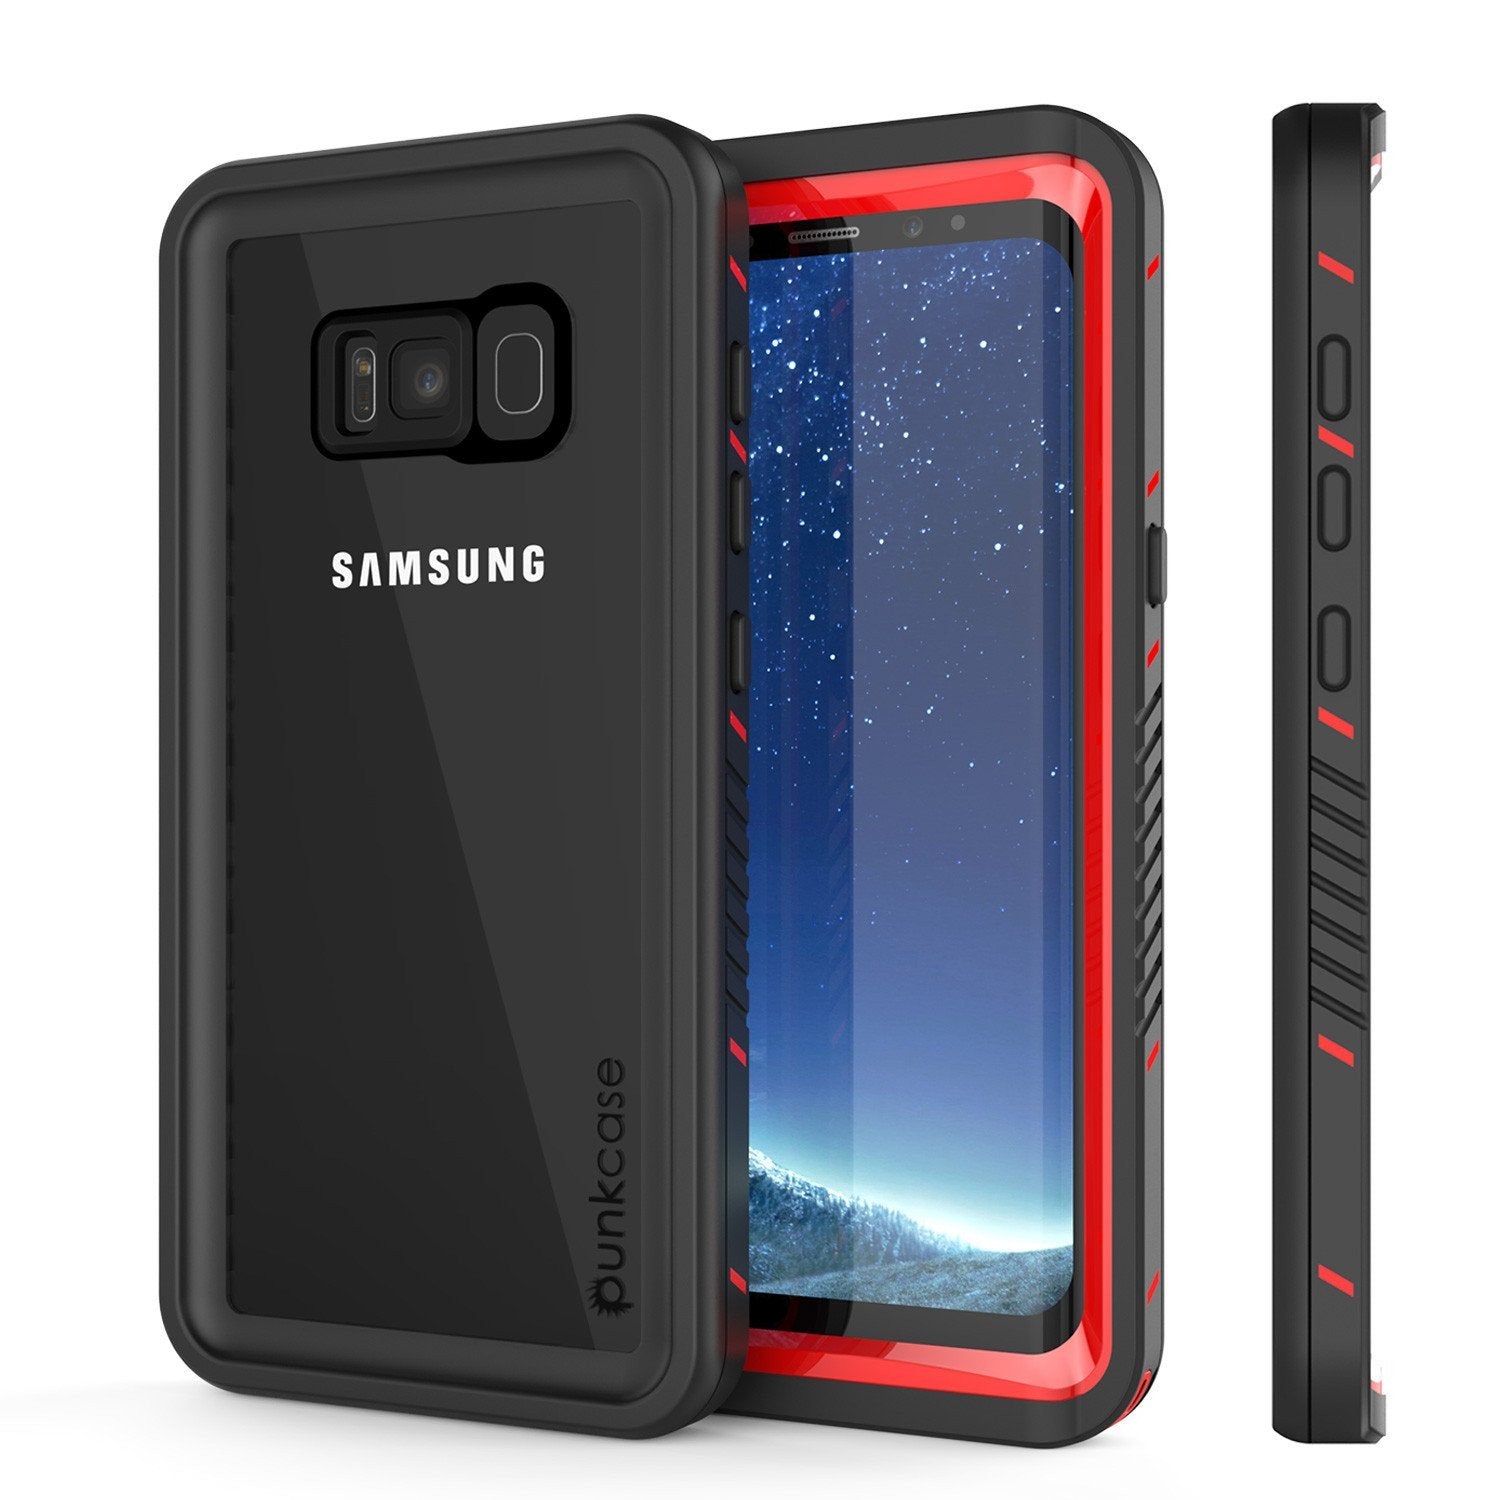 Galaxy S8 PLUS Waterproof Case, Punkcase [Extreme Series] [Slim Fit] [IP68 Certified] [Shockproof] [Snowproof] [Dirproof] Armor Cover W/ Built In Screen Protector for Samsung Galaxy S8+ [Red] - PunkCase NZ